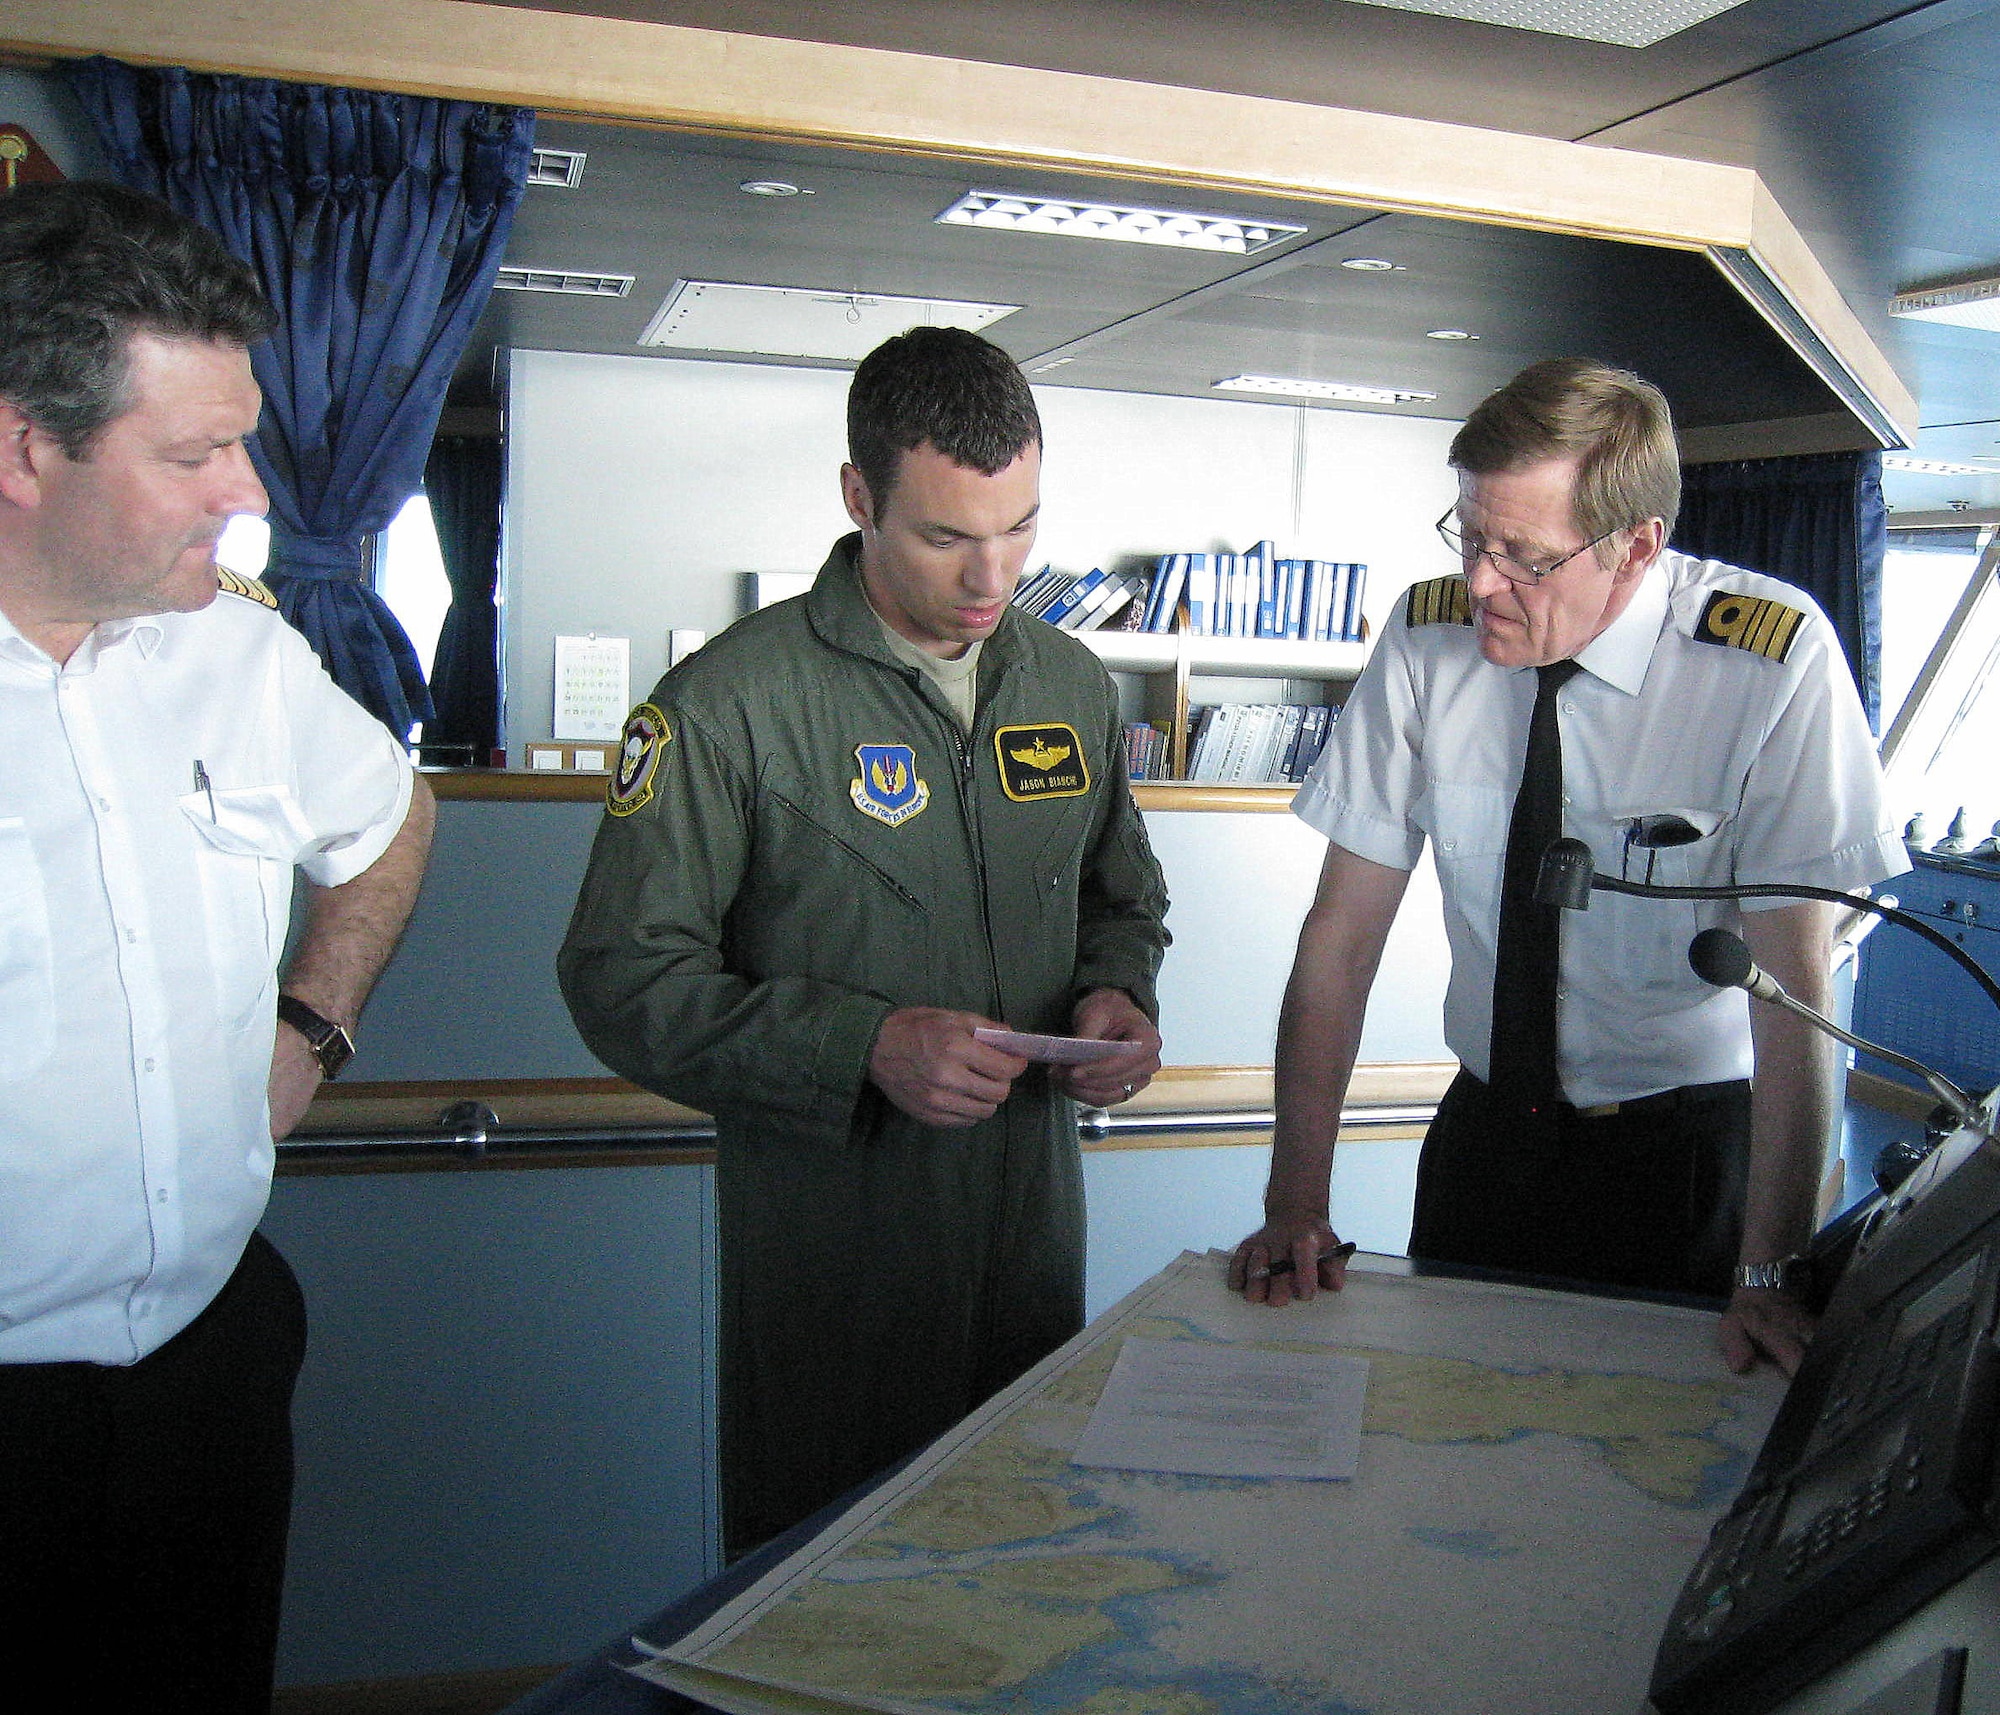 KEFLAVIK, Iceland — From left, Icelandic Coast Guard Capt. Halldor Nellet, U.S. Air Force Maj. Jason Bianchi, 493rd Expeditionary Fighter Squadron F-15C pilot deployed from Royal Air Force Lakenheath, England, and ICG Cmdr. Sigurdur Steinar Ketilsson conduct a mission briefing before a search and rescue exercise off the coast of Iceland May 30, 2012. During the exercise, two F-15C Eagle pilots from the 493rd EFS simulated a bailout scenario over Icelandic waters.  Pararescuemen jumped into the water and provided medical treatment to the “downed” pilot, who was then hoisted to safety by an Icelandic helicopter.  The rescue exercise increased interoperability, as well as developed cohesion between the ICG and the 493rd EFS, which is deployed to Iceland to conduct NATO air policing until June 7, 2012. (Photo Courtesy of Icelandic Coast Guard)                         